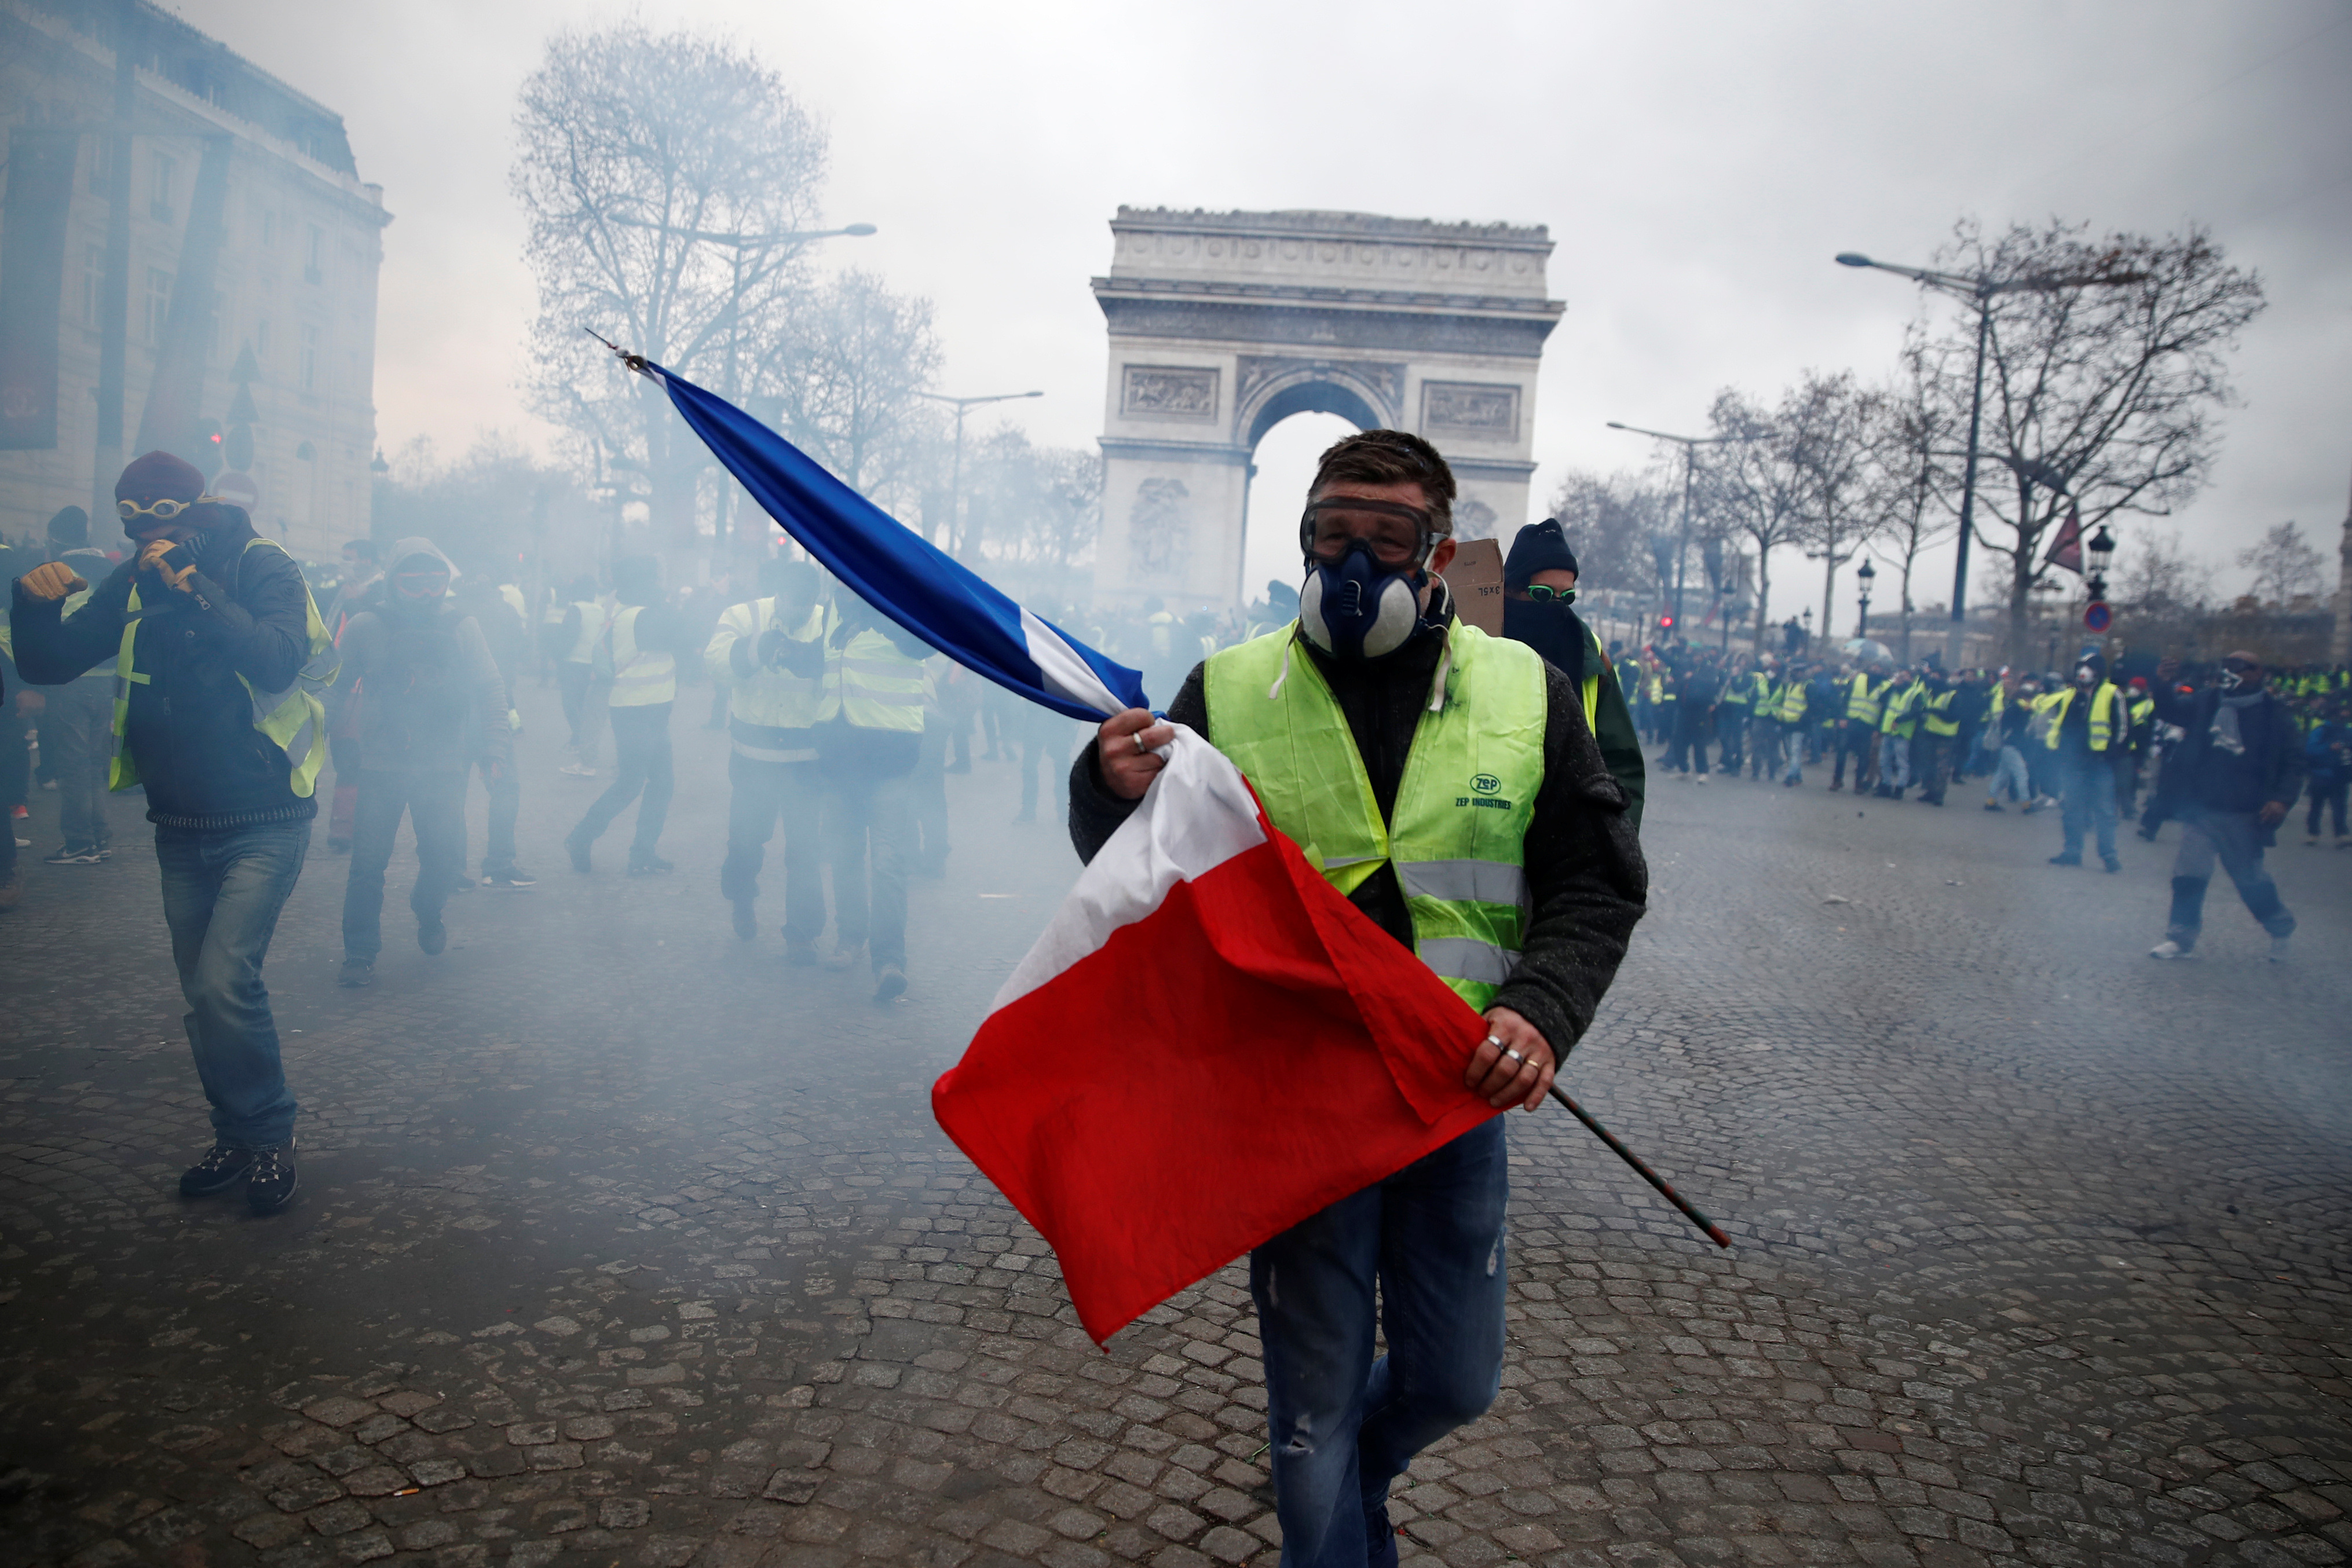 Anger over airlines not paying tax on fuel contributed to the gilet jaune protests in France in 2018